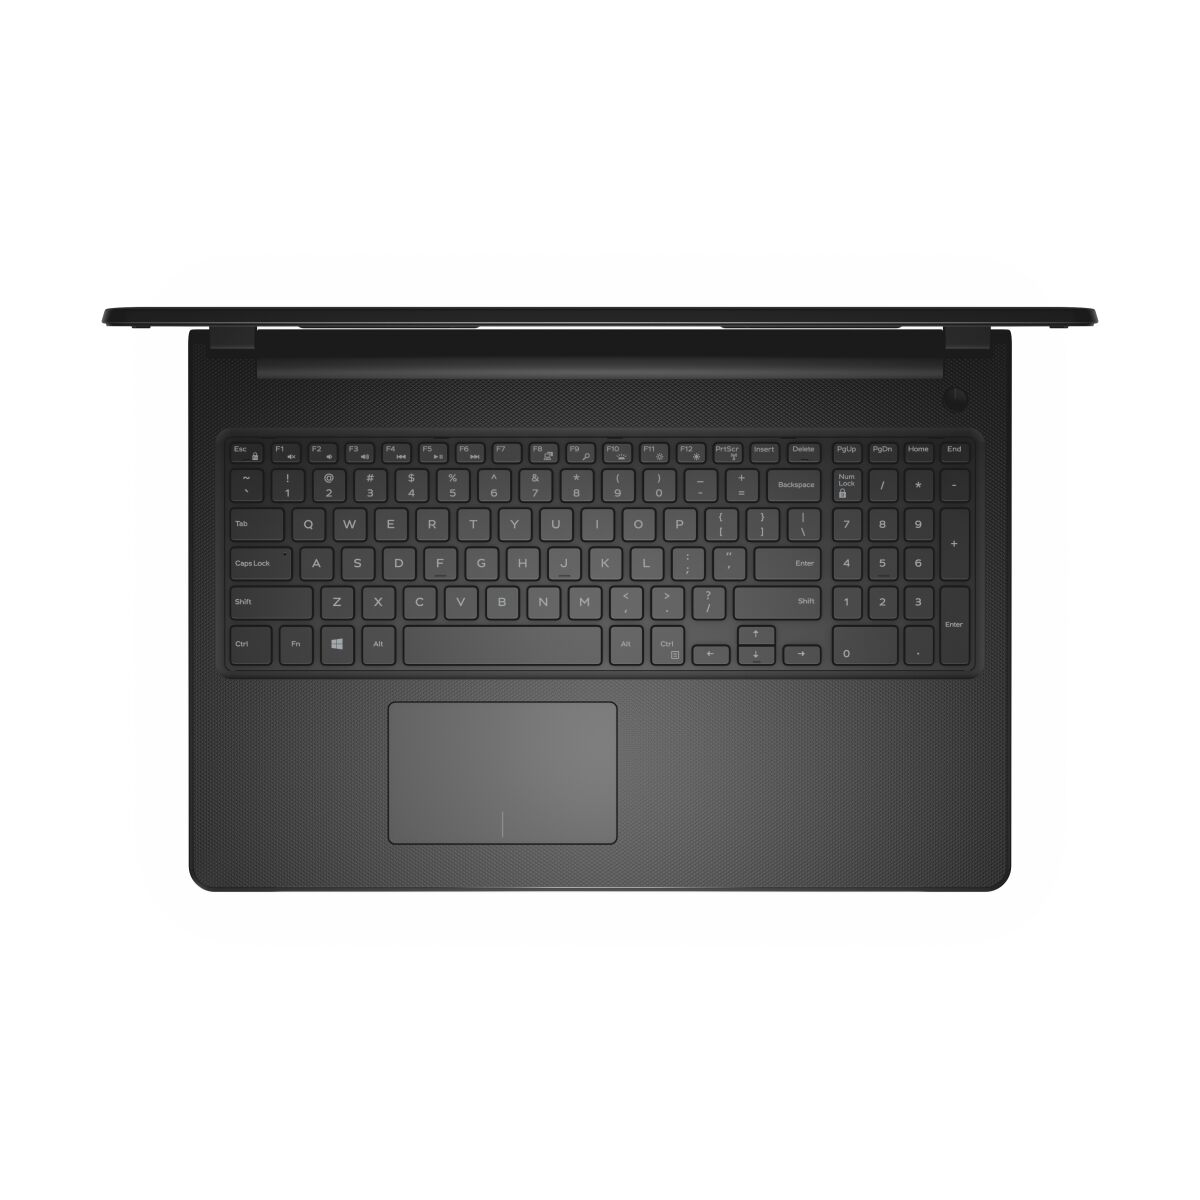 Dell Inspiron 3576 Ins 3576 00002 Blk Laptop Specifications 0870